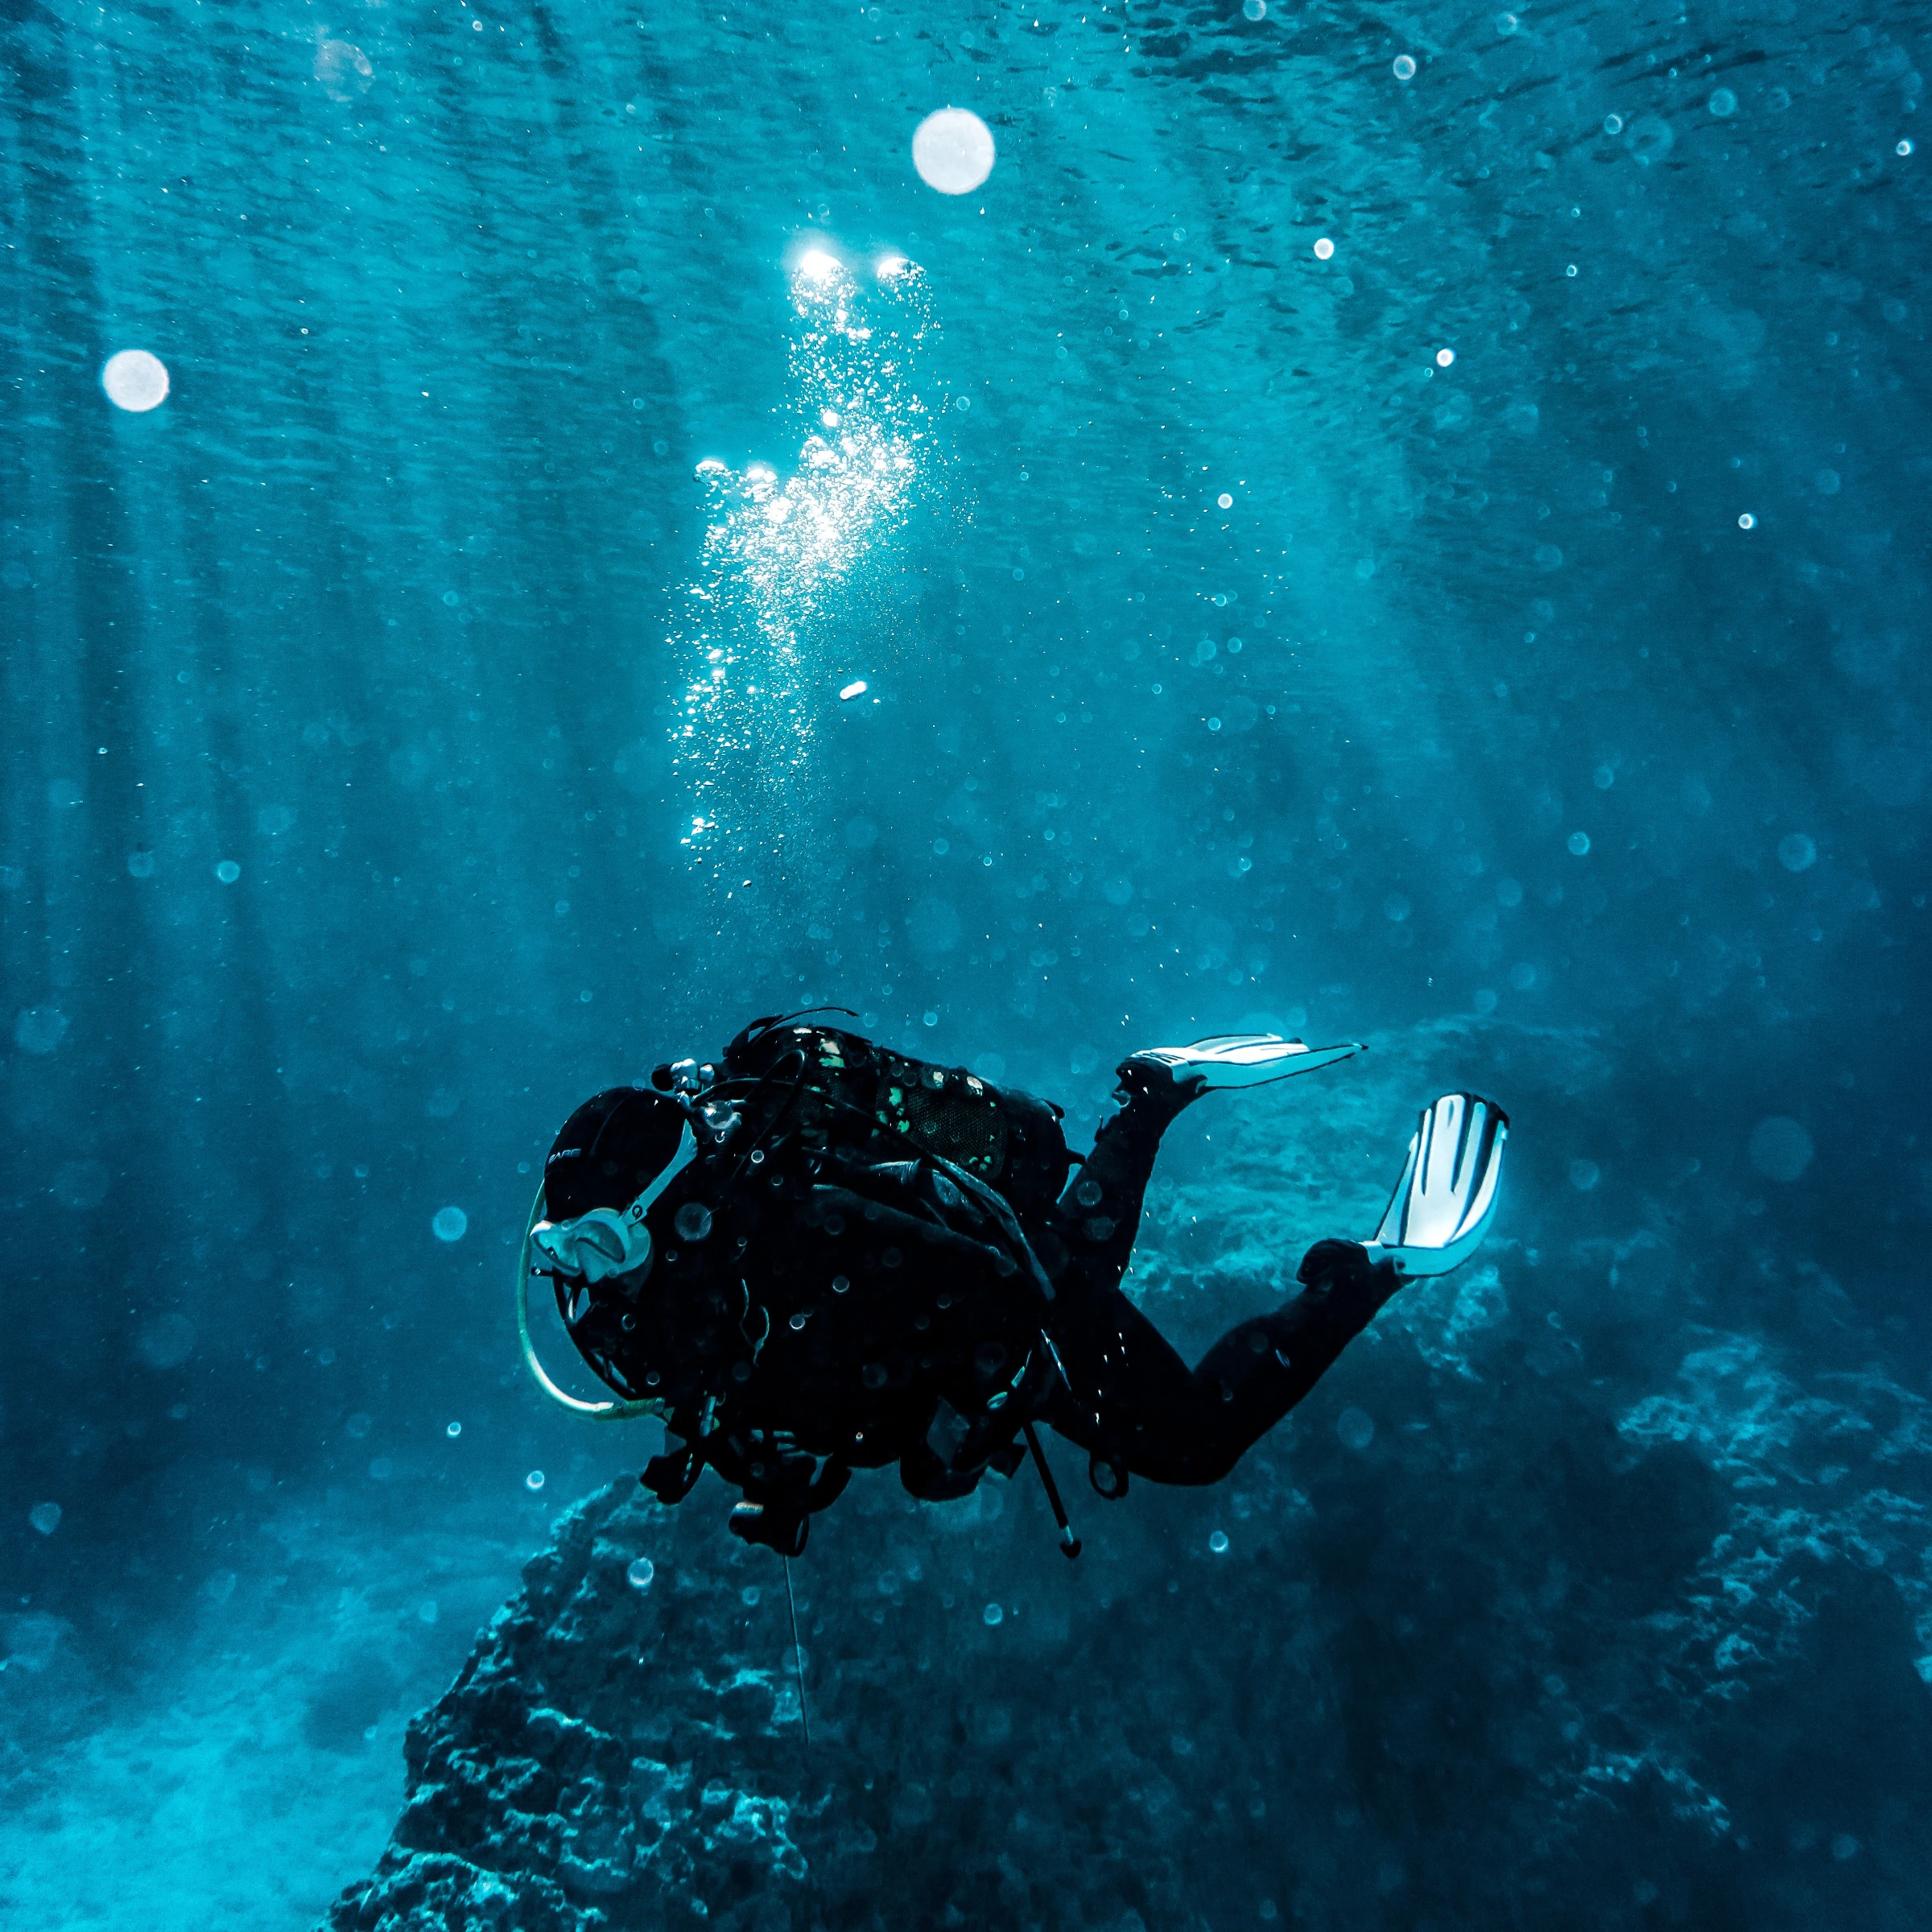 diver underwater conducting search & recovery